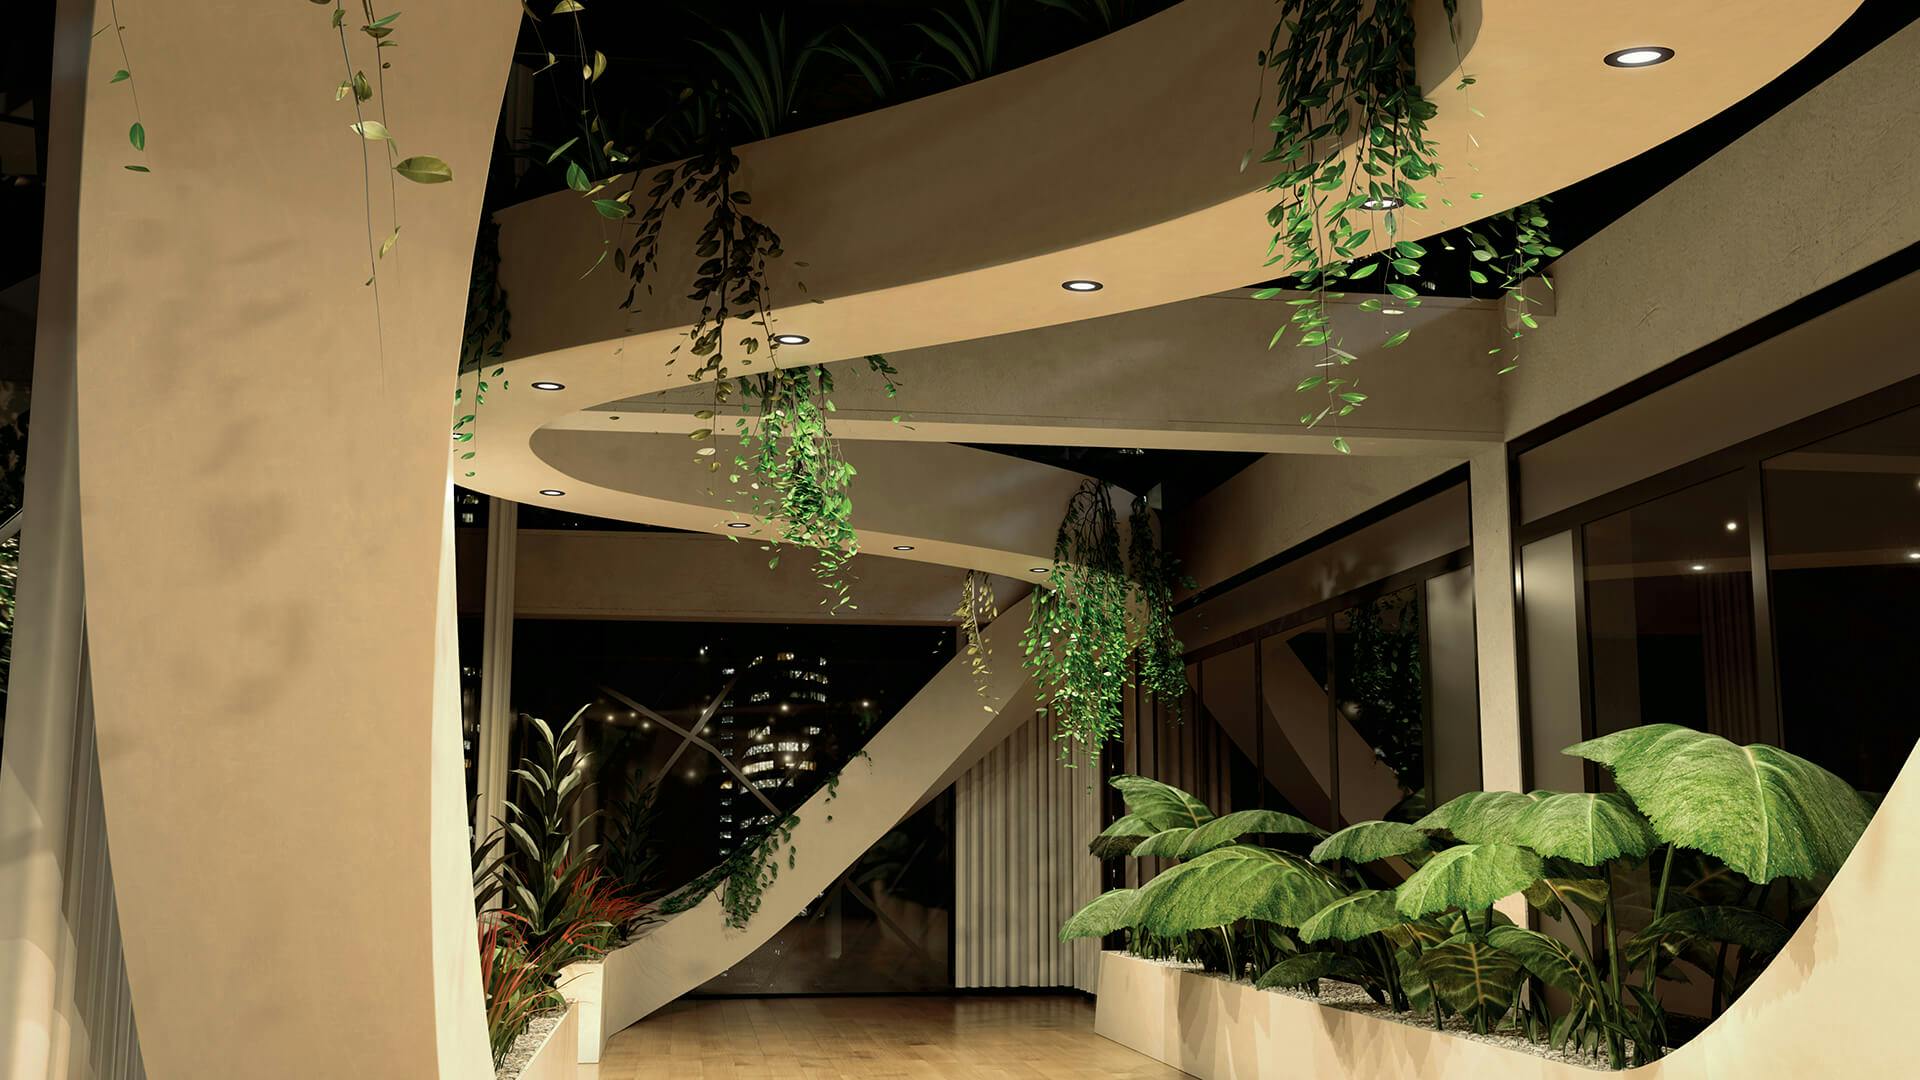 Unique lobby with partial ceiling moving in a sloping shape and greenery hanging off its ledges.